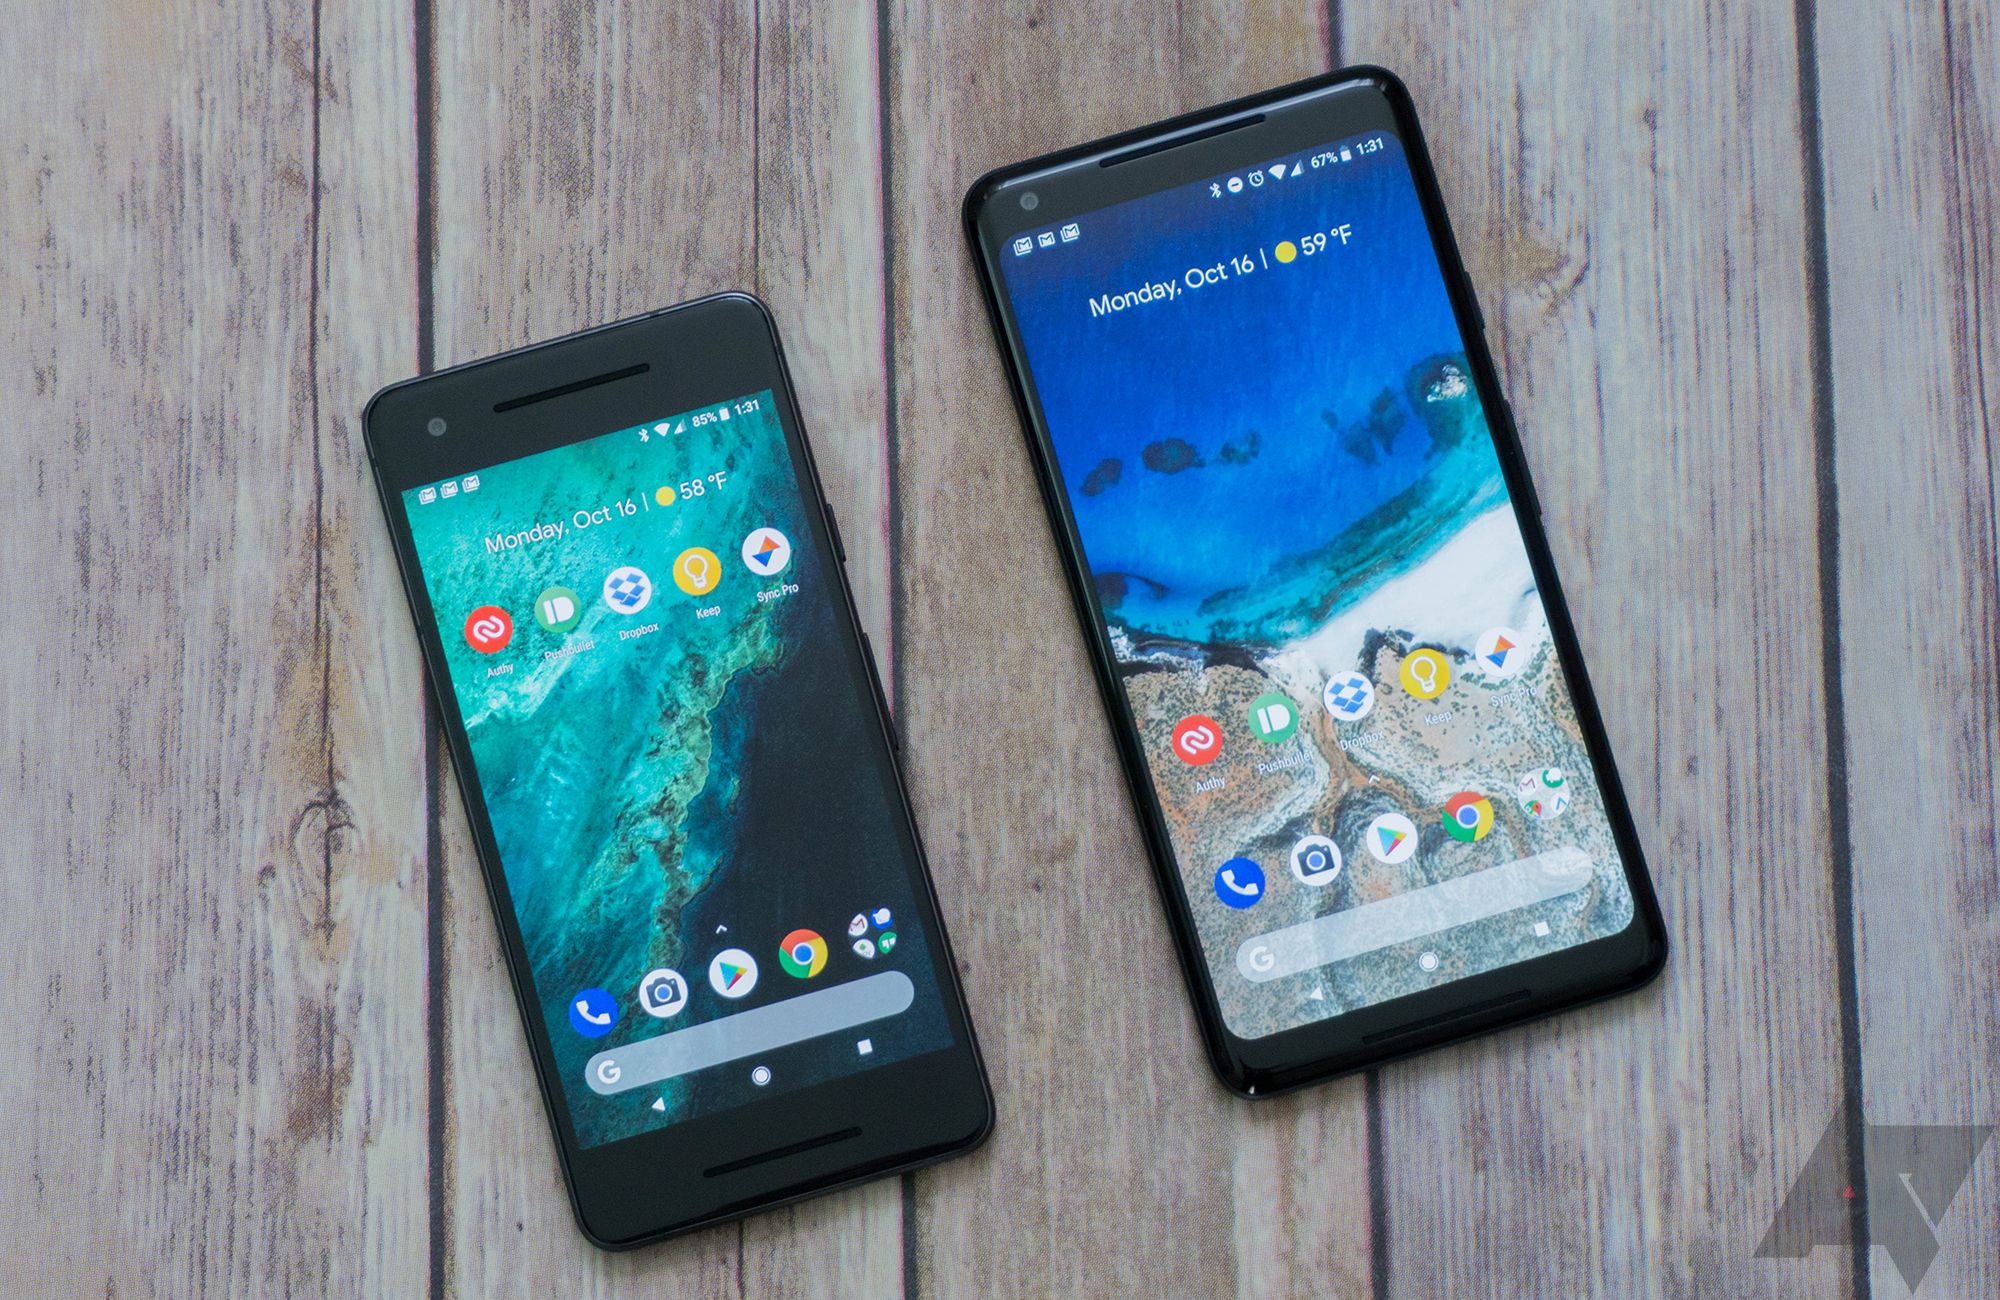 Pixel 2 XL hands-on: The best Android phone just got better